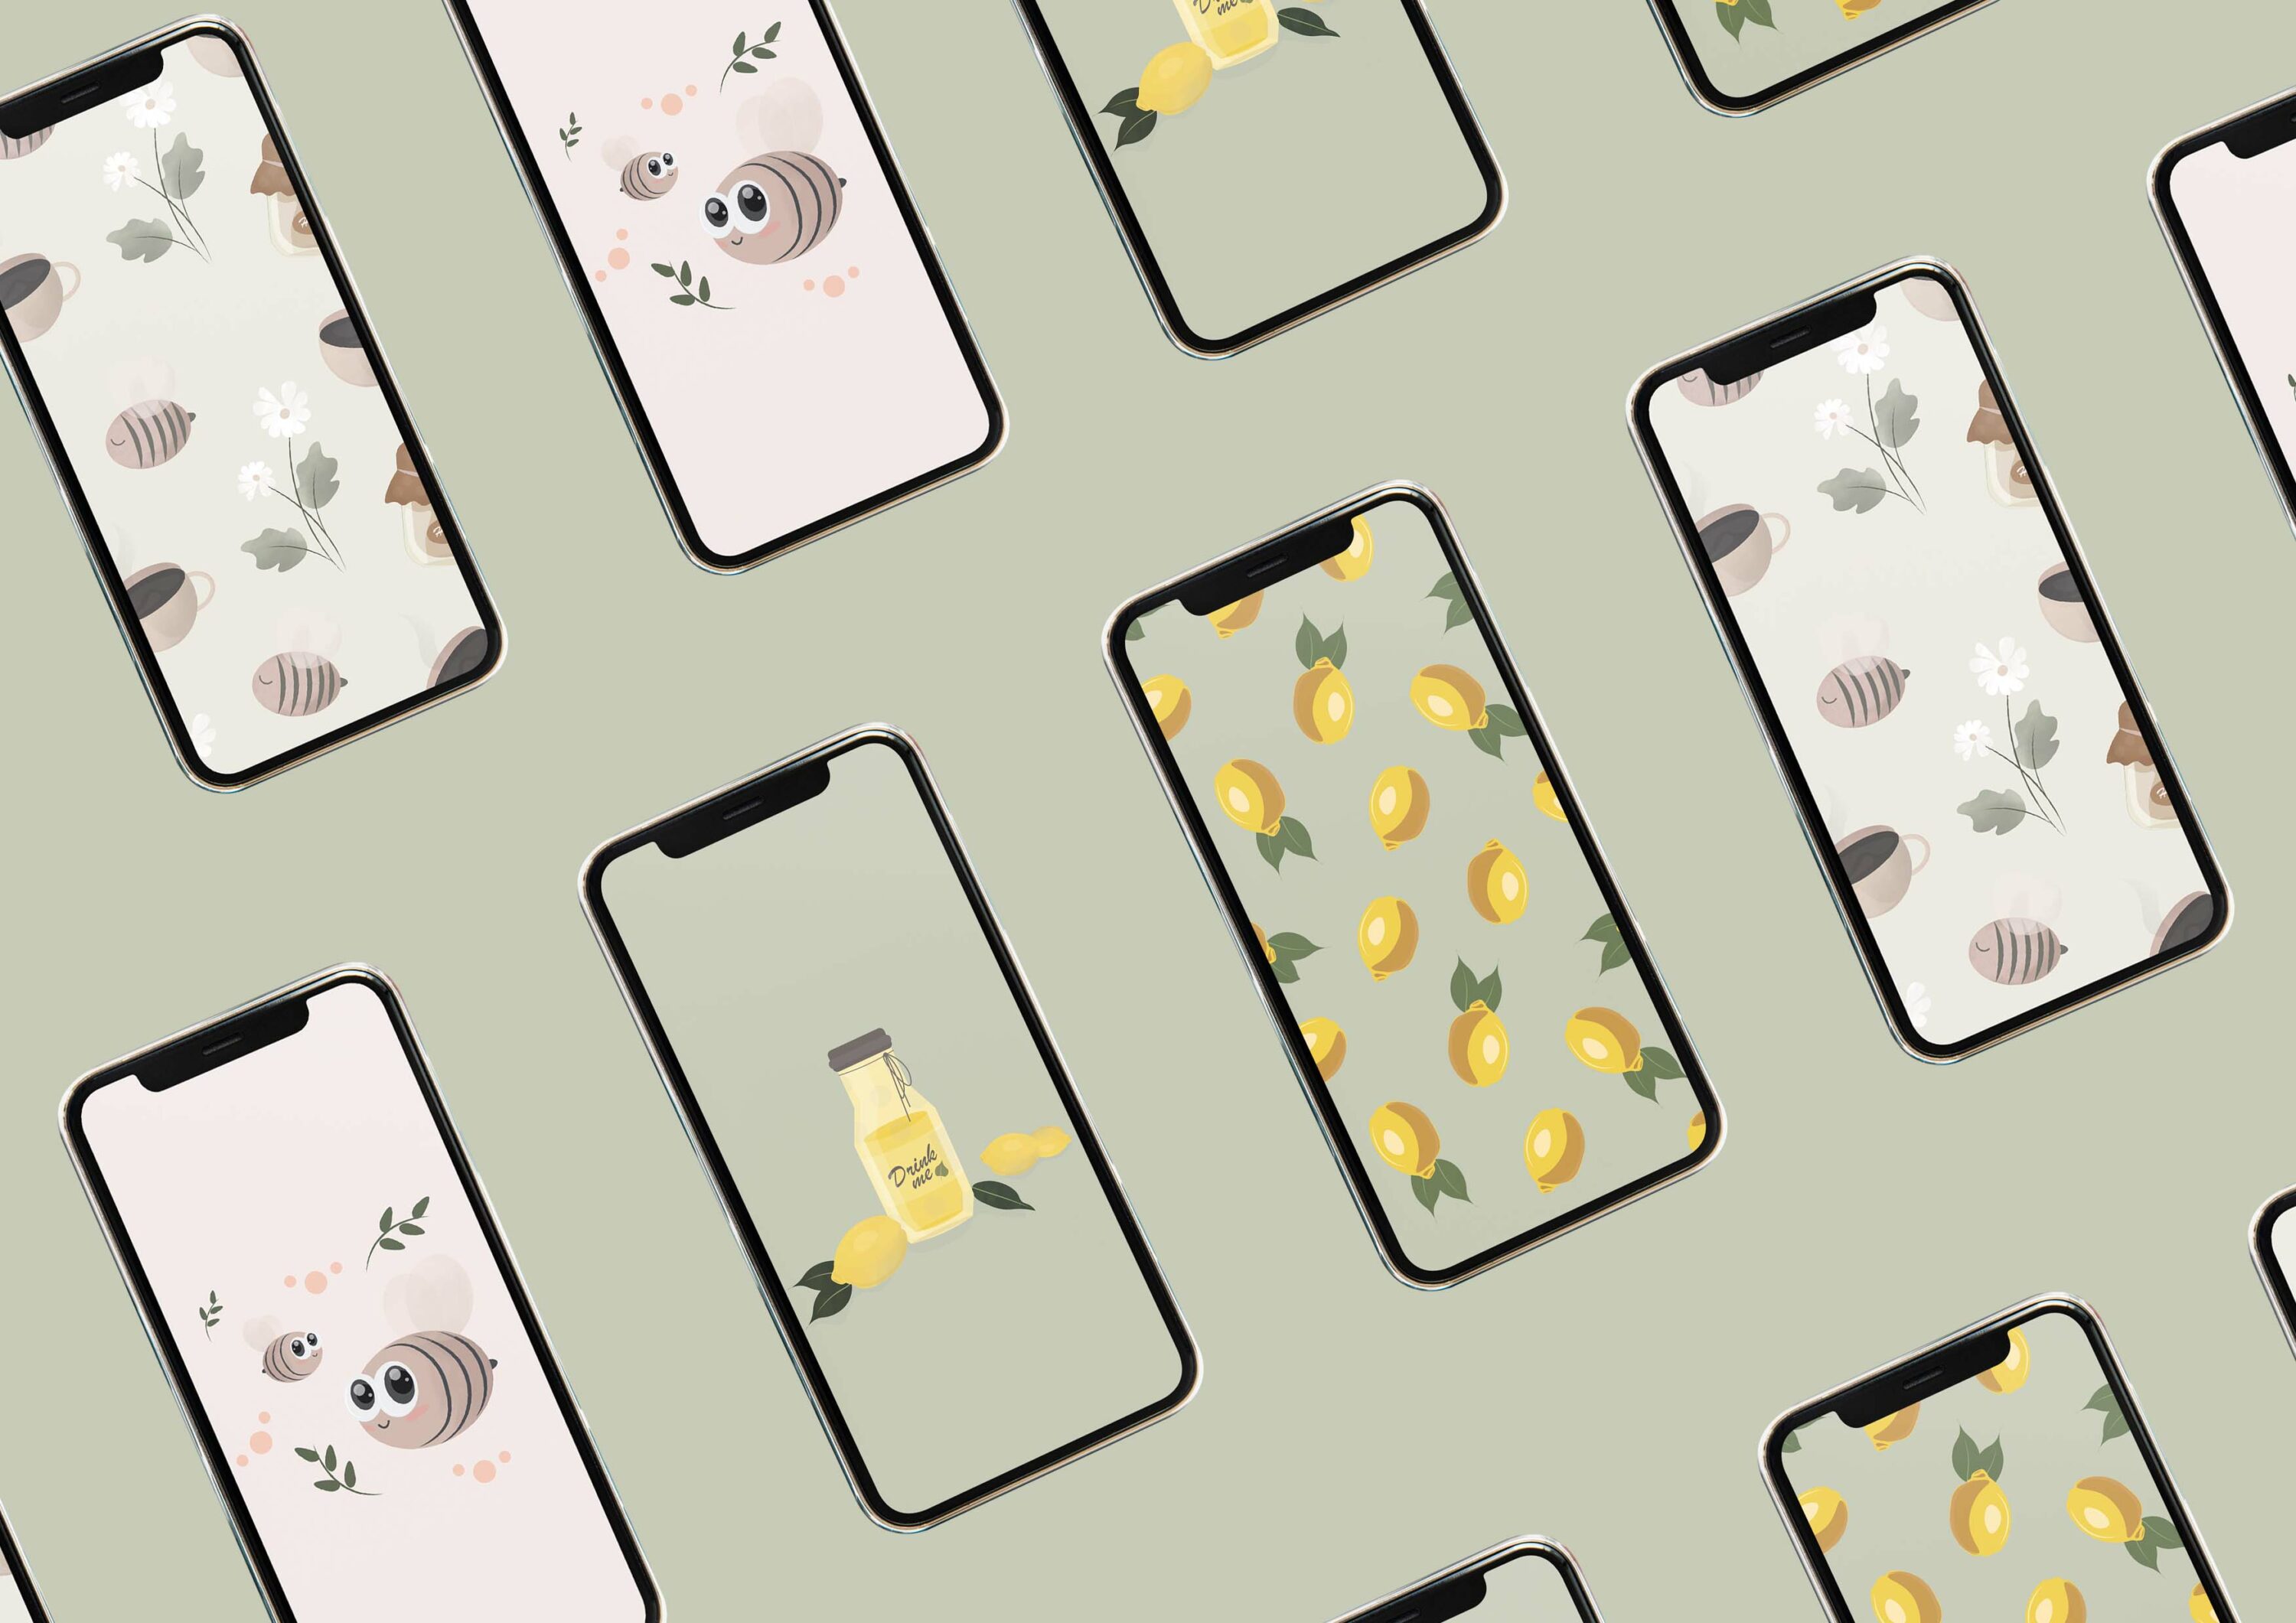 Bees Illustrations And Spring Patterns Phone Example.